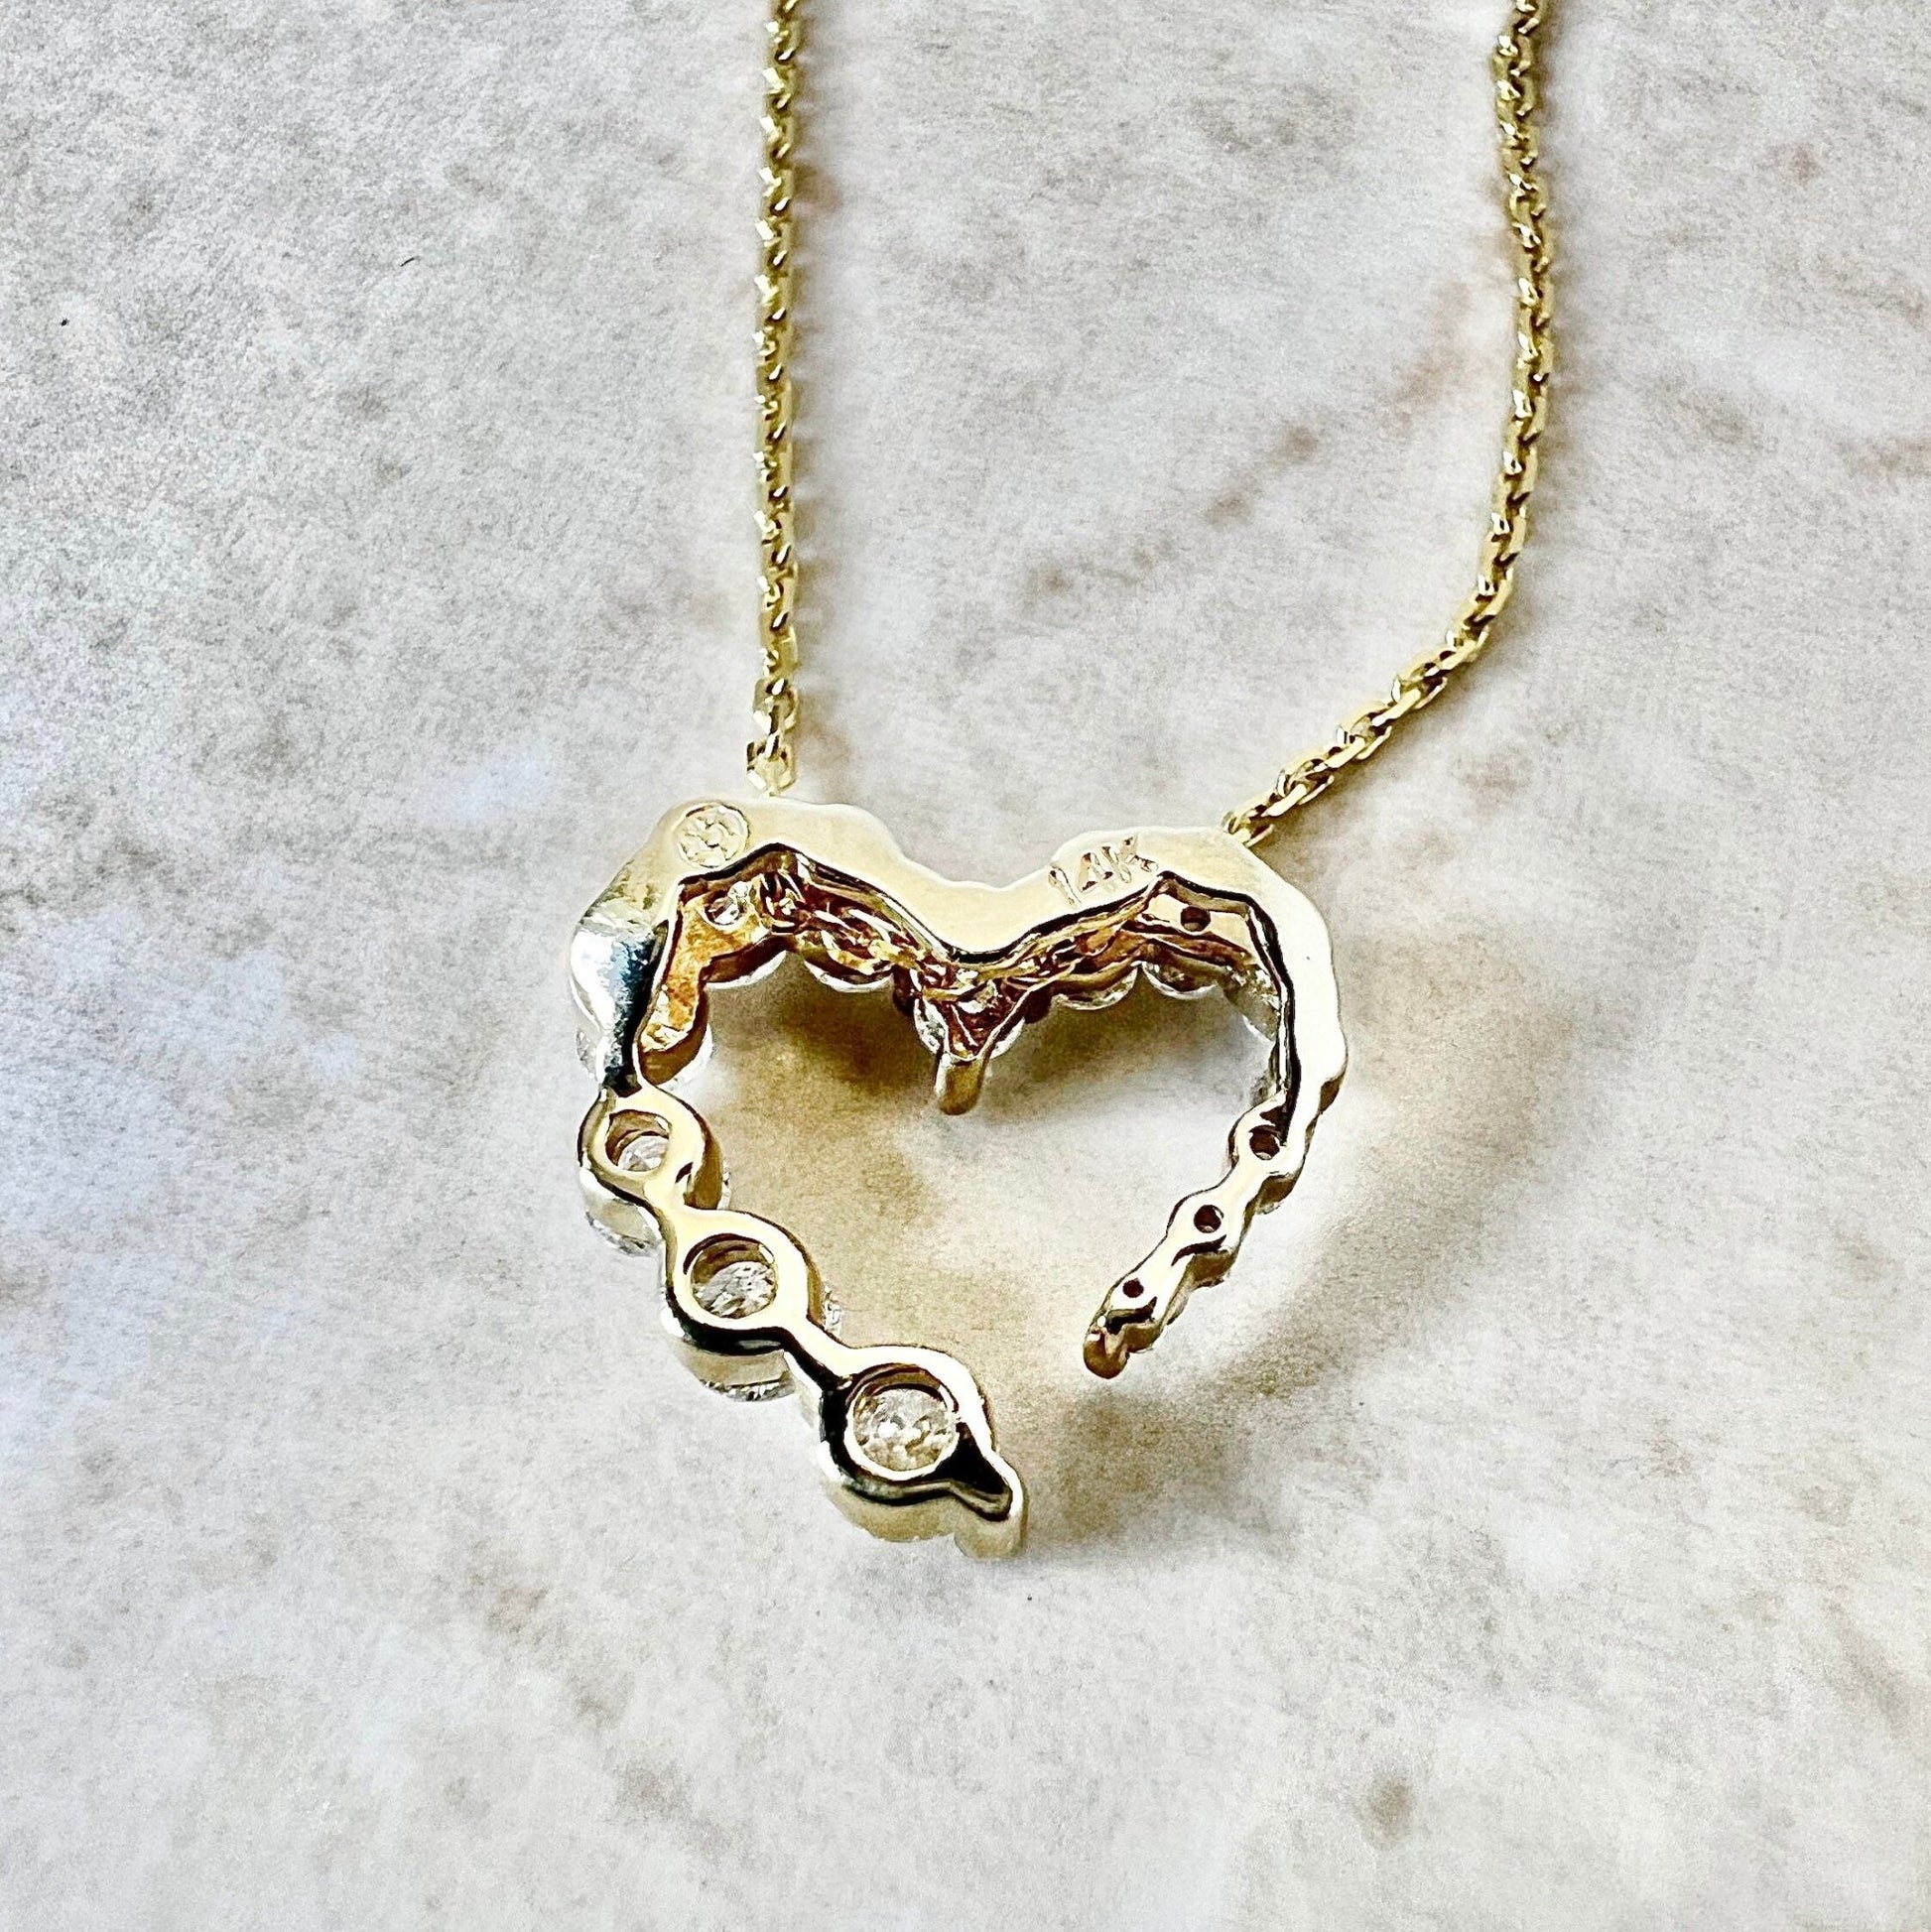 14K Diamond Heart Pendant Necklace - Yellow Gold Diamond Necklace - Heart Necklace - Diamond Pendant - Christmas Best Gifts For Her